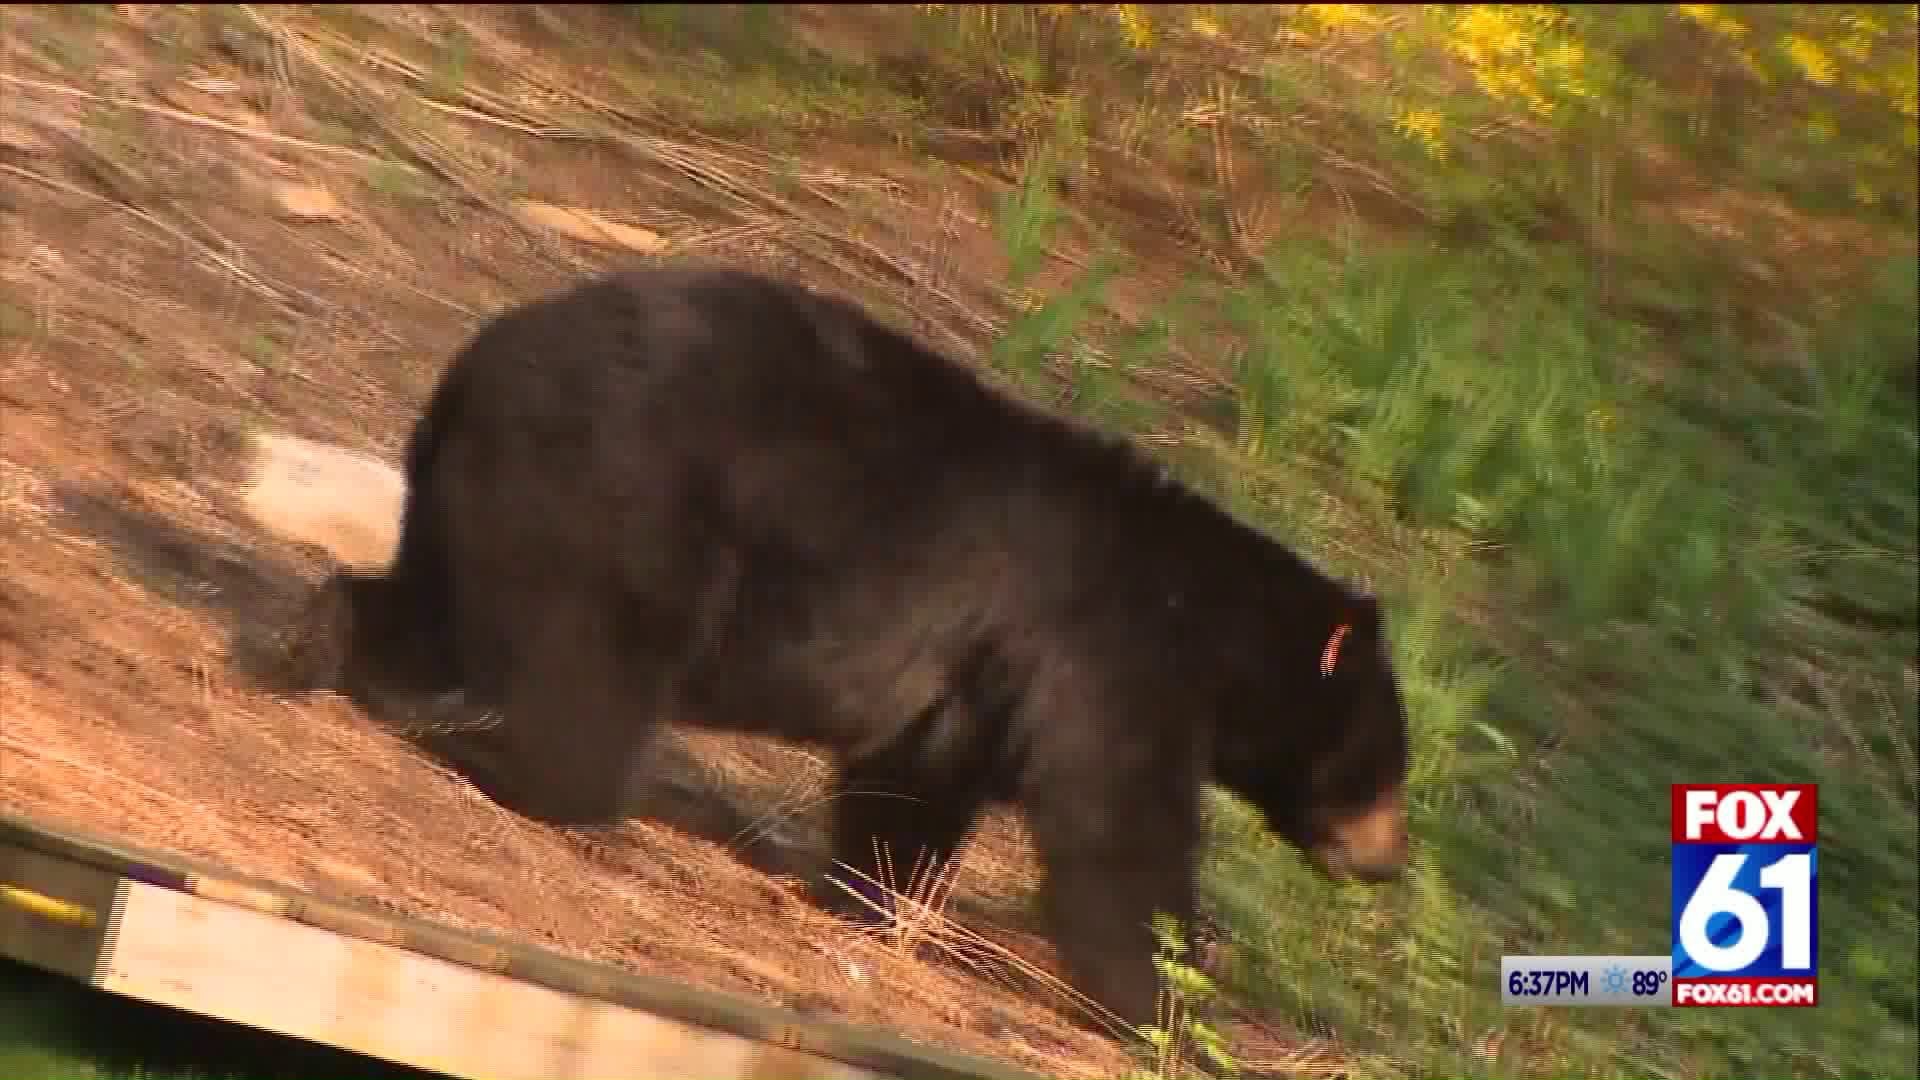 Bear photo tourism experiments have Litchfield County residents outraged